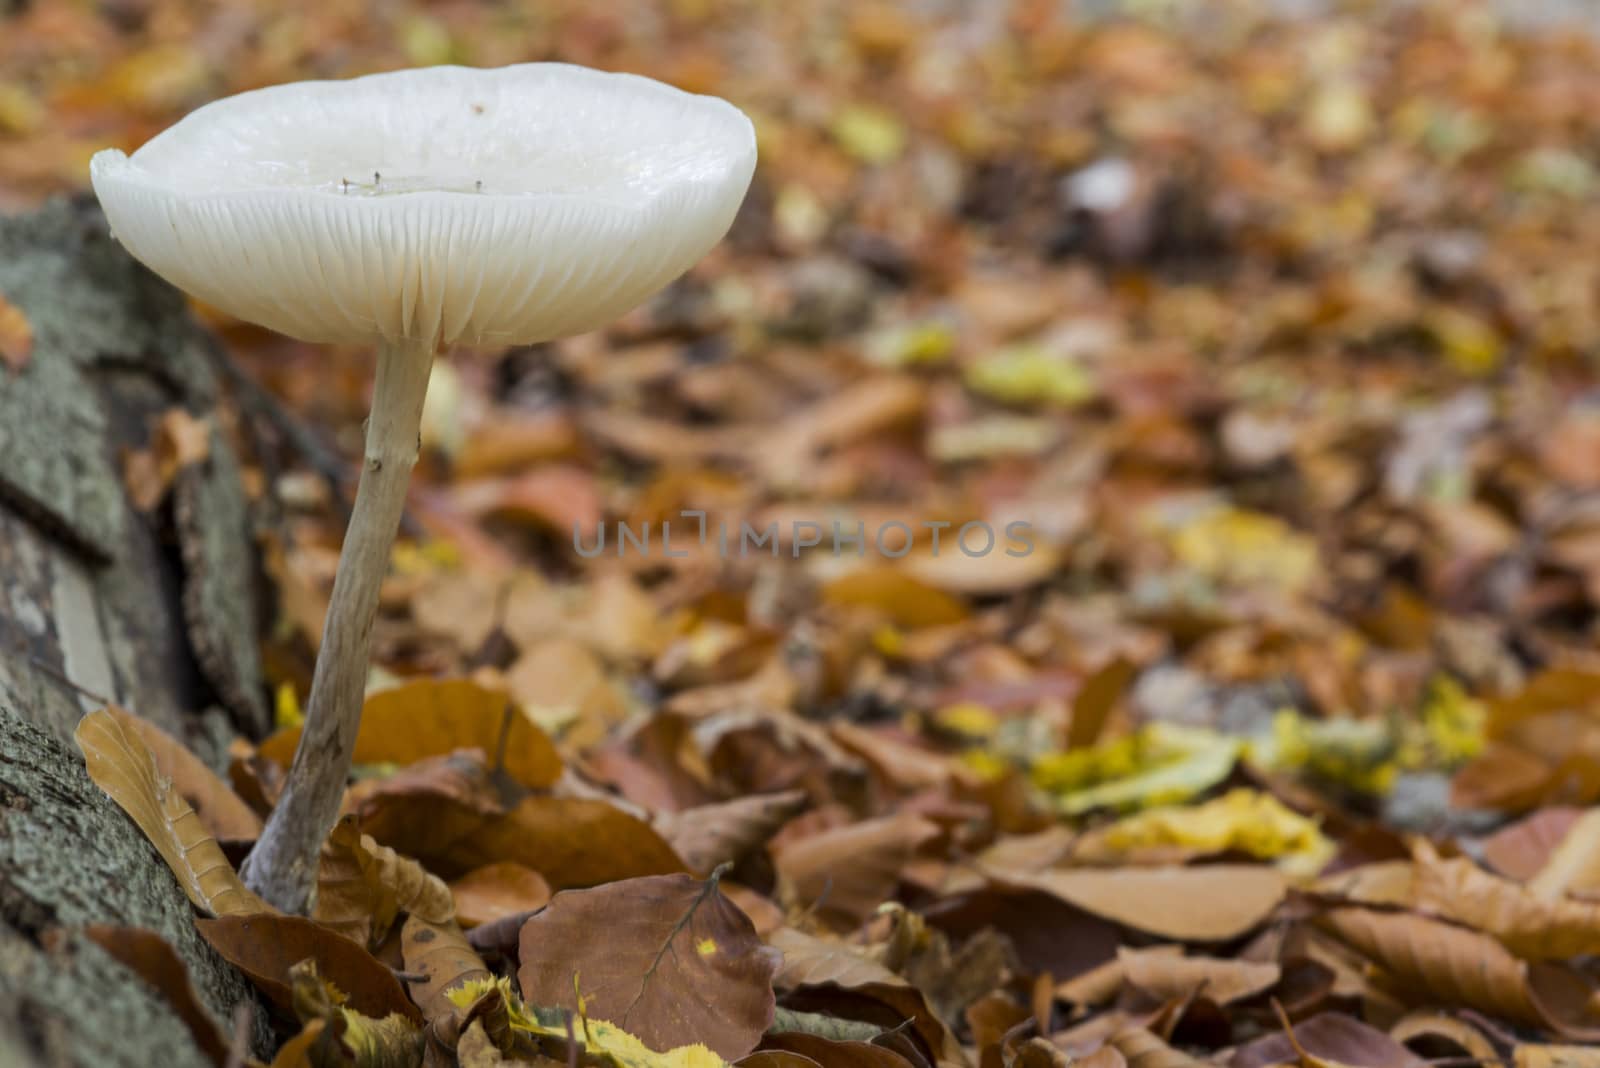 single fungus in autumn forest with leaves 